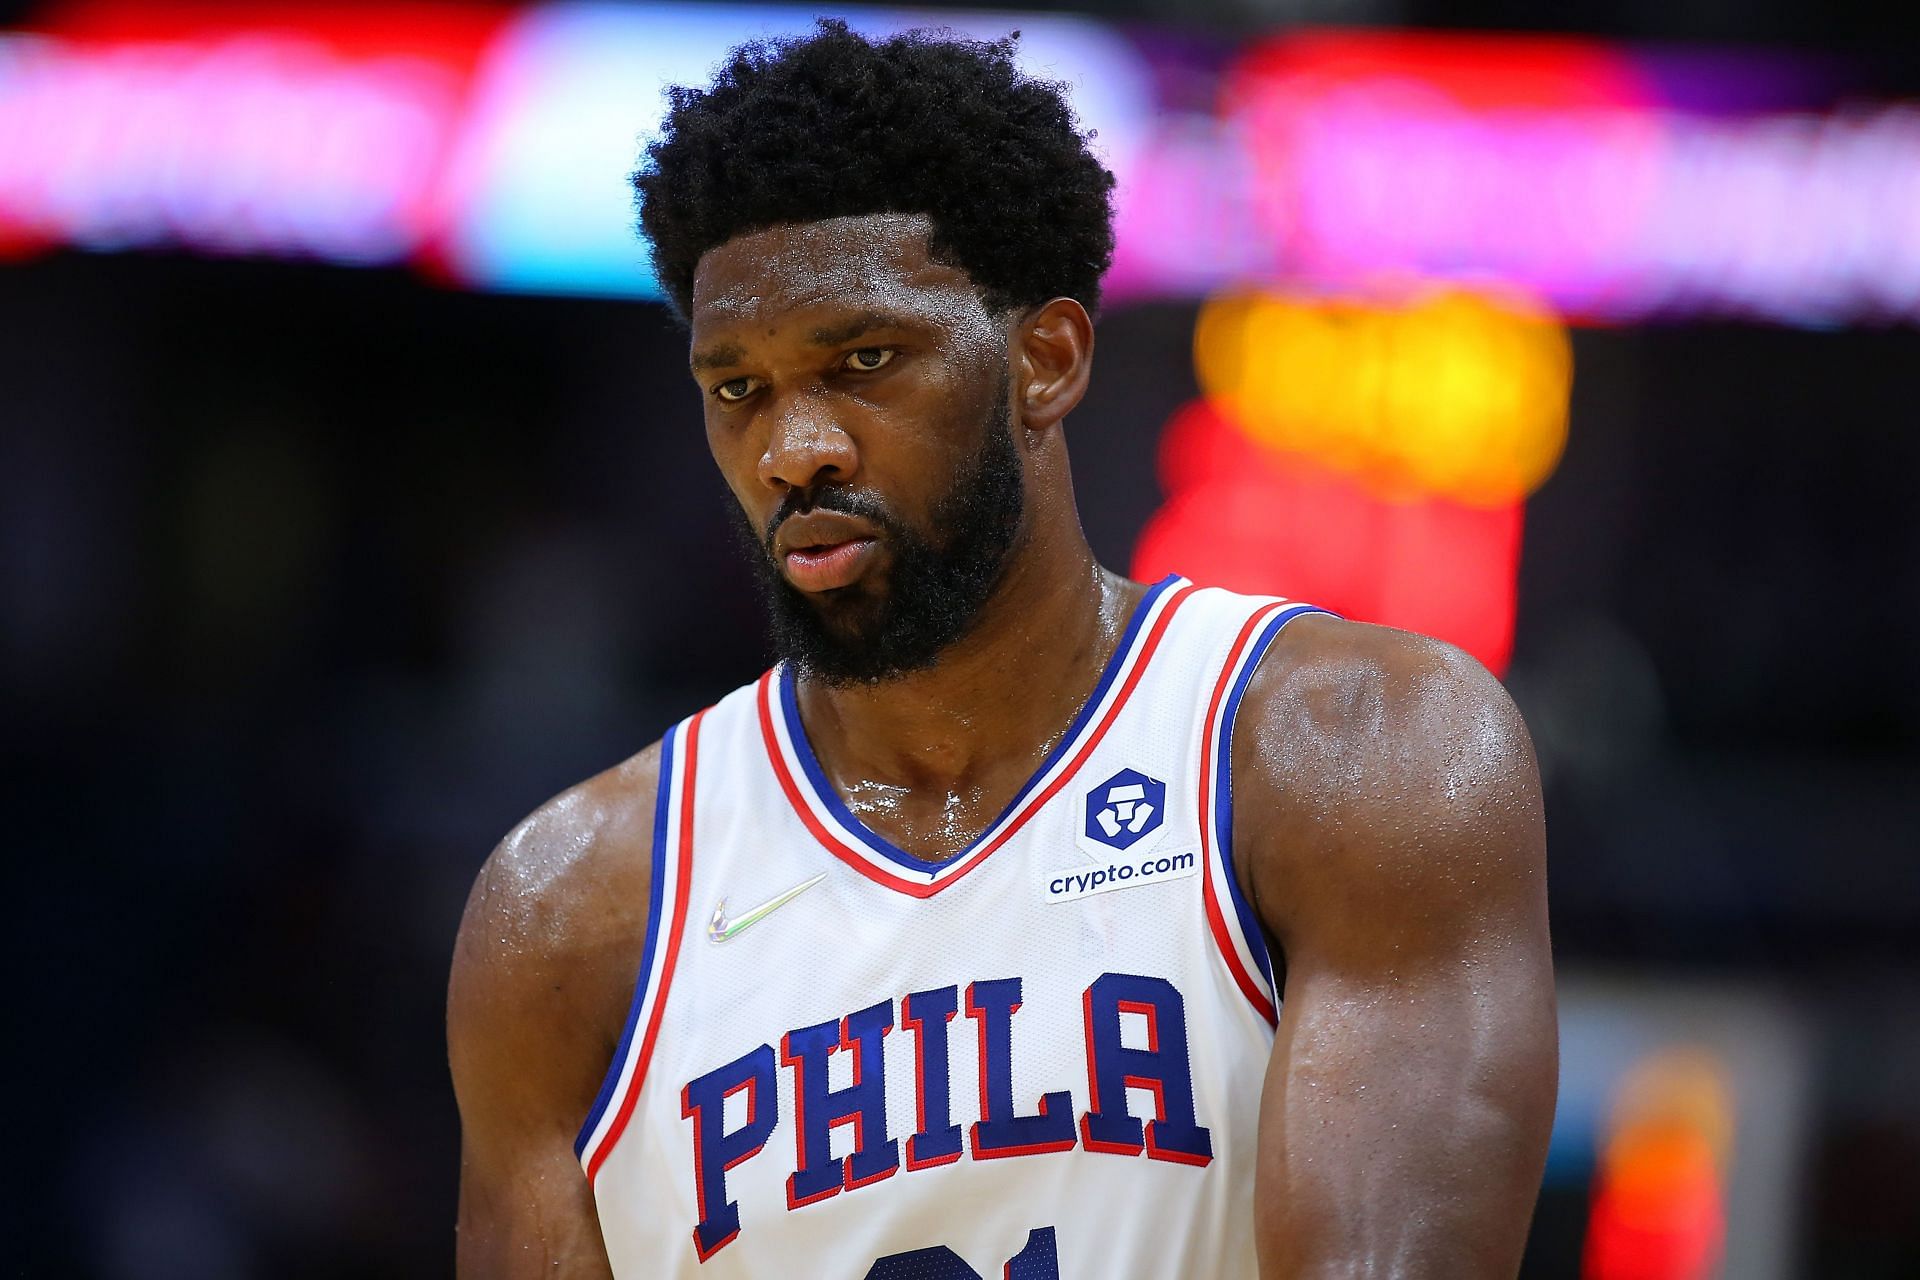 Philadelphia 76ers star Joel Embiid is starting to feel the toll of the season with the increased burden